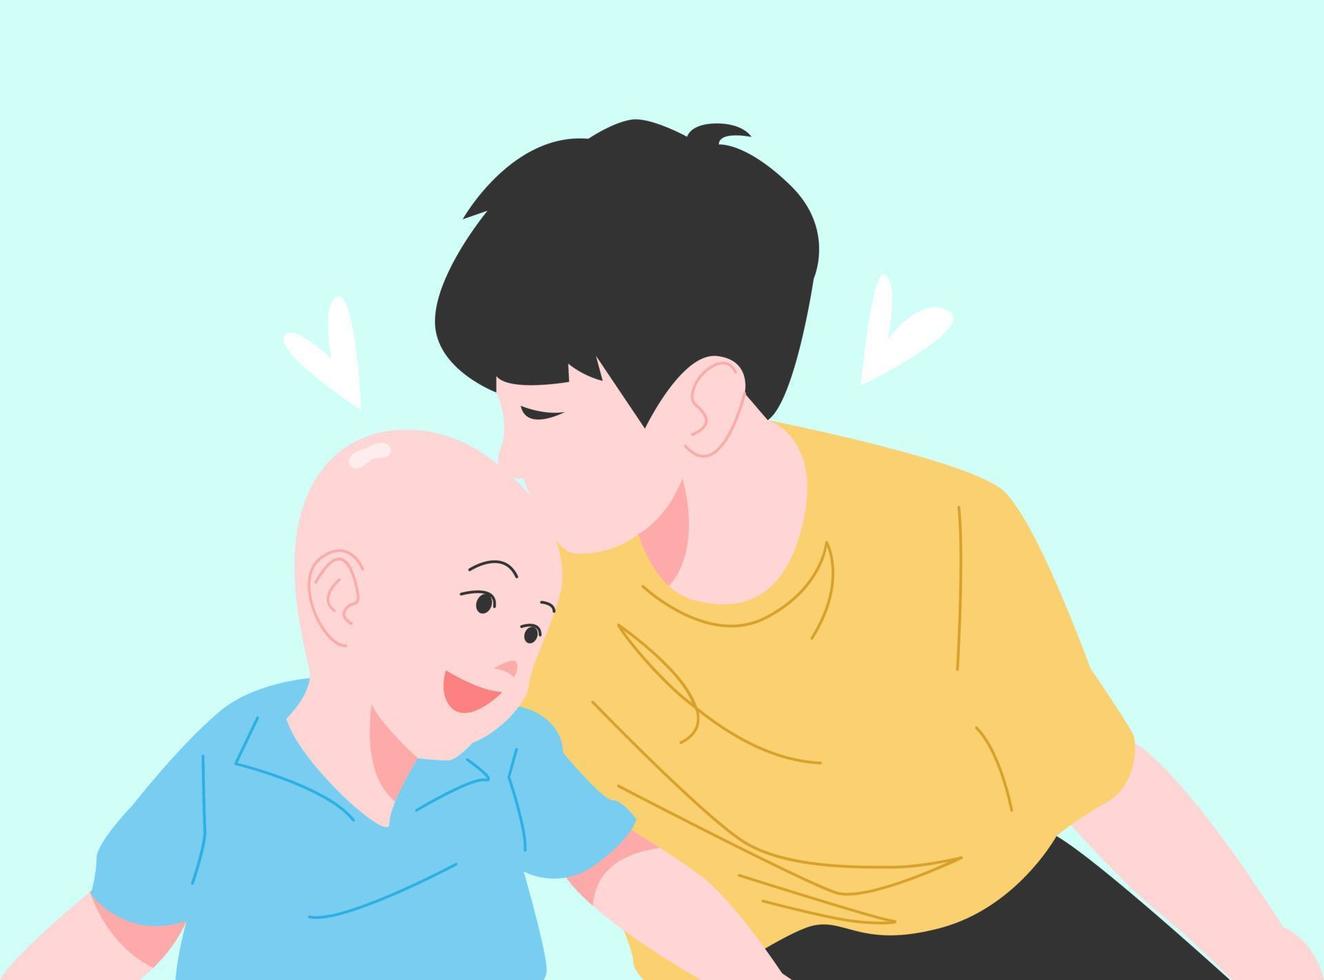 older brother kisses younger brother's forehead. boy and baby happy, laughing. different ages. concept of family, love, etc. flat style vector illustration.